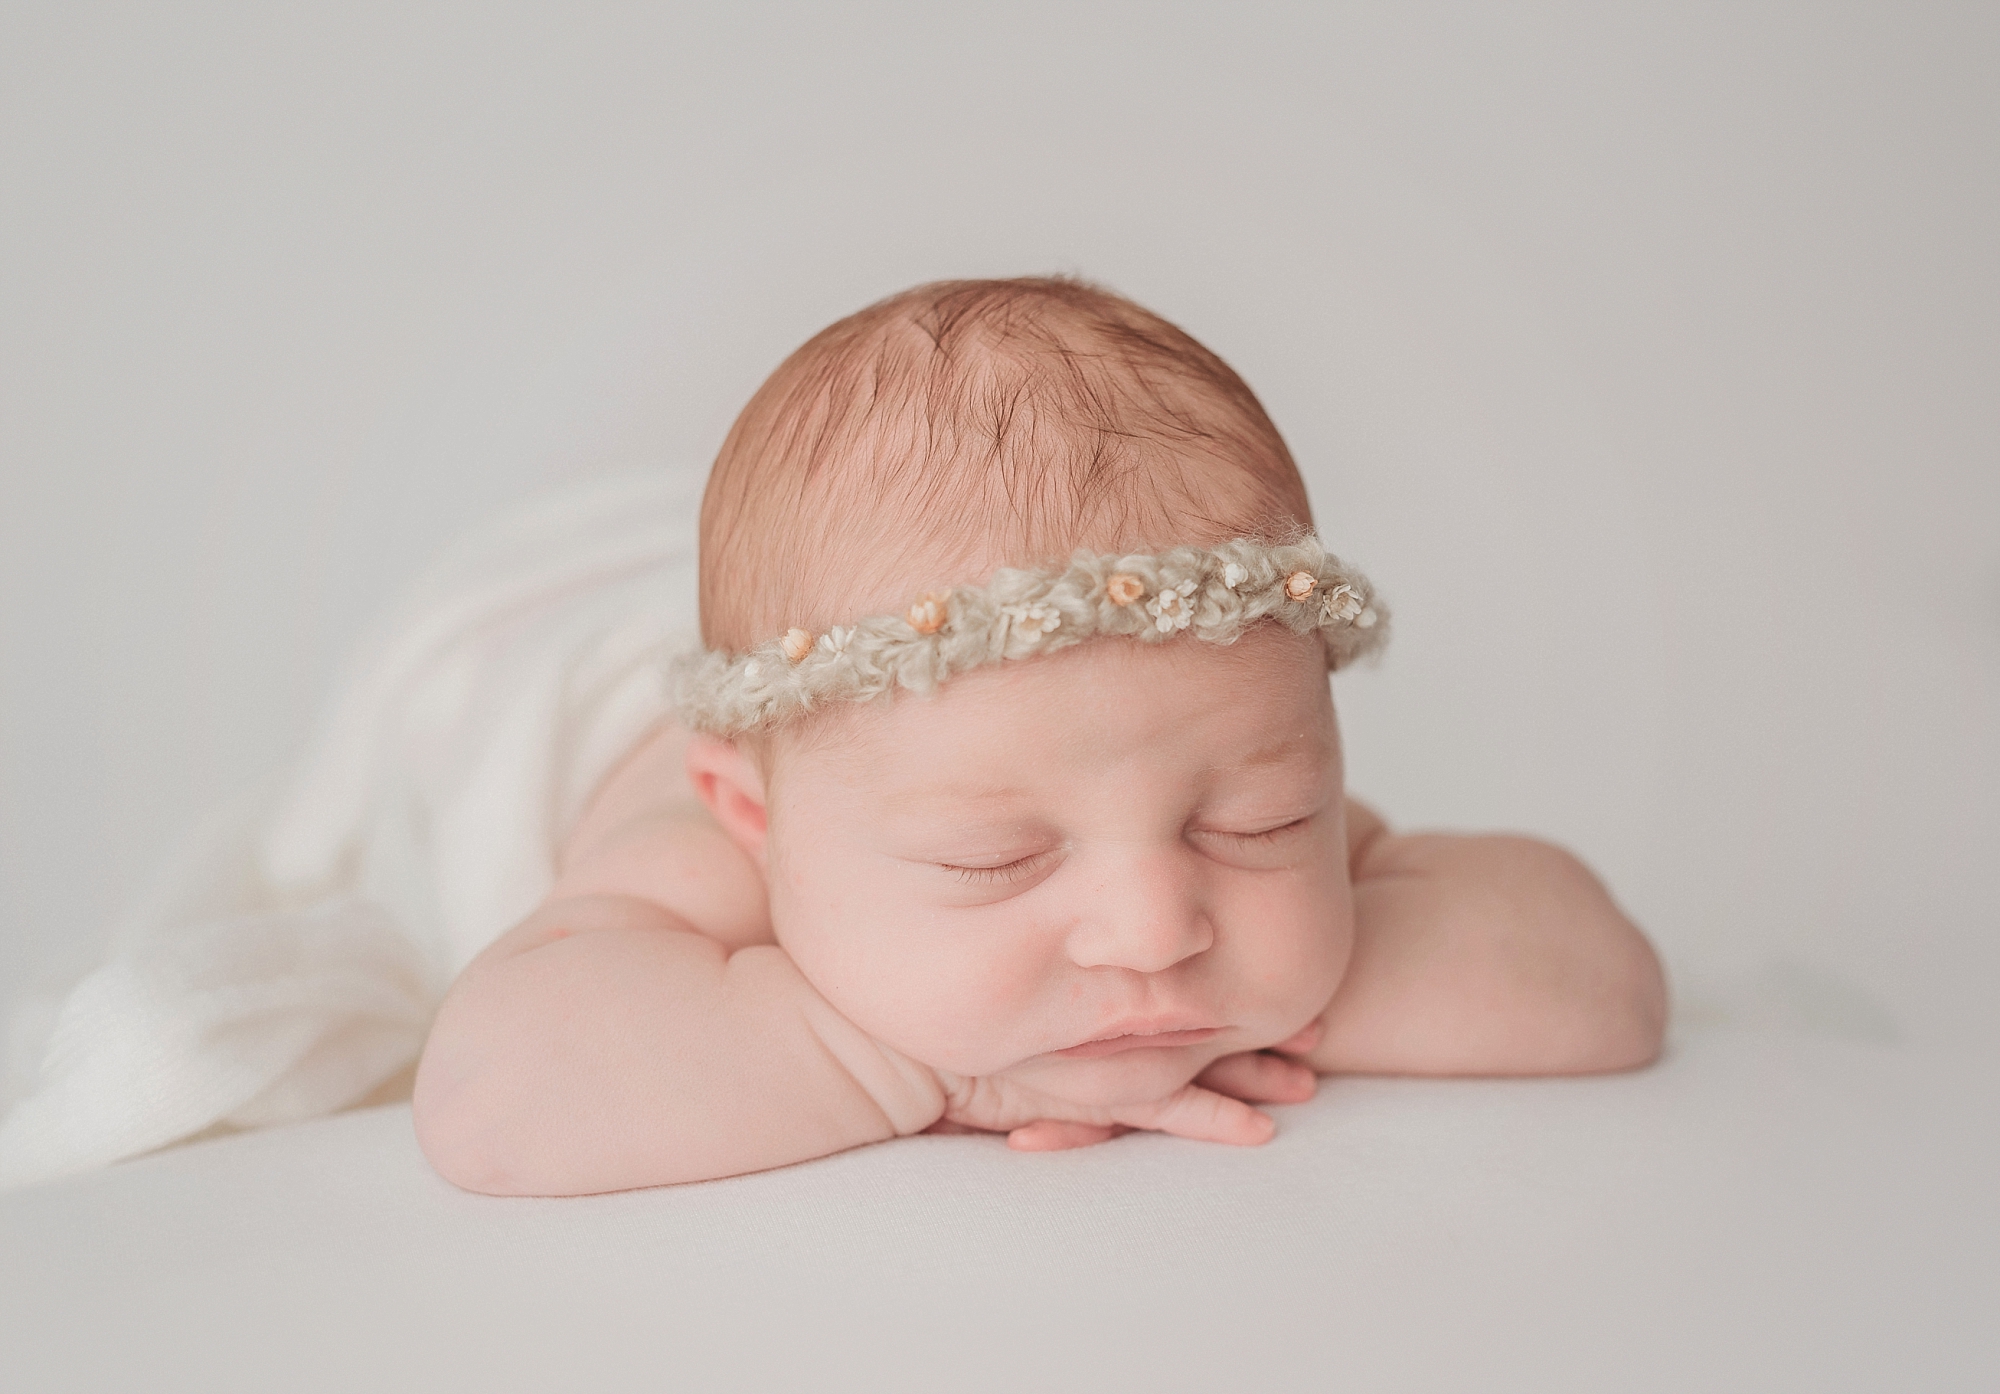 Sleeping newborn baby girl posed with floral crown in San Diego photography studio